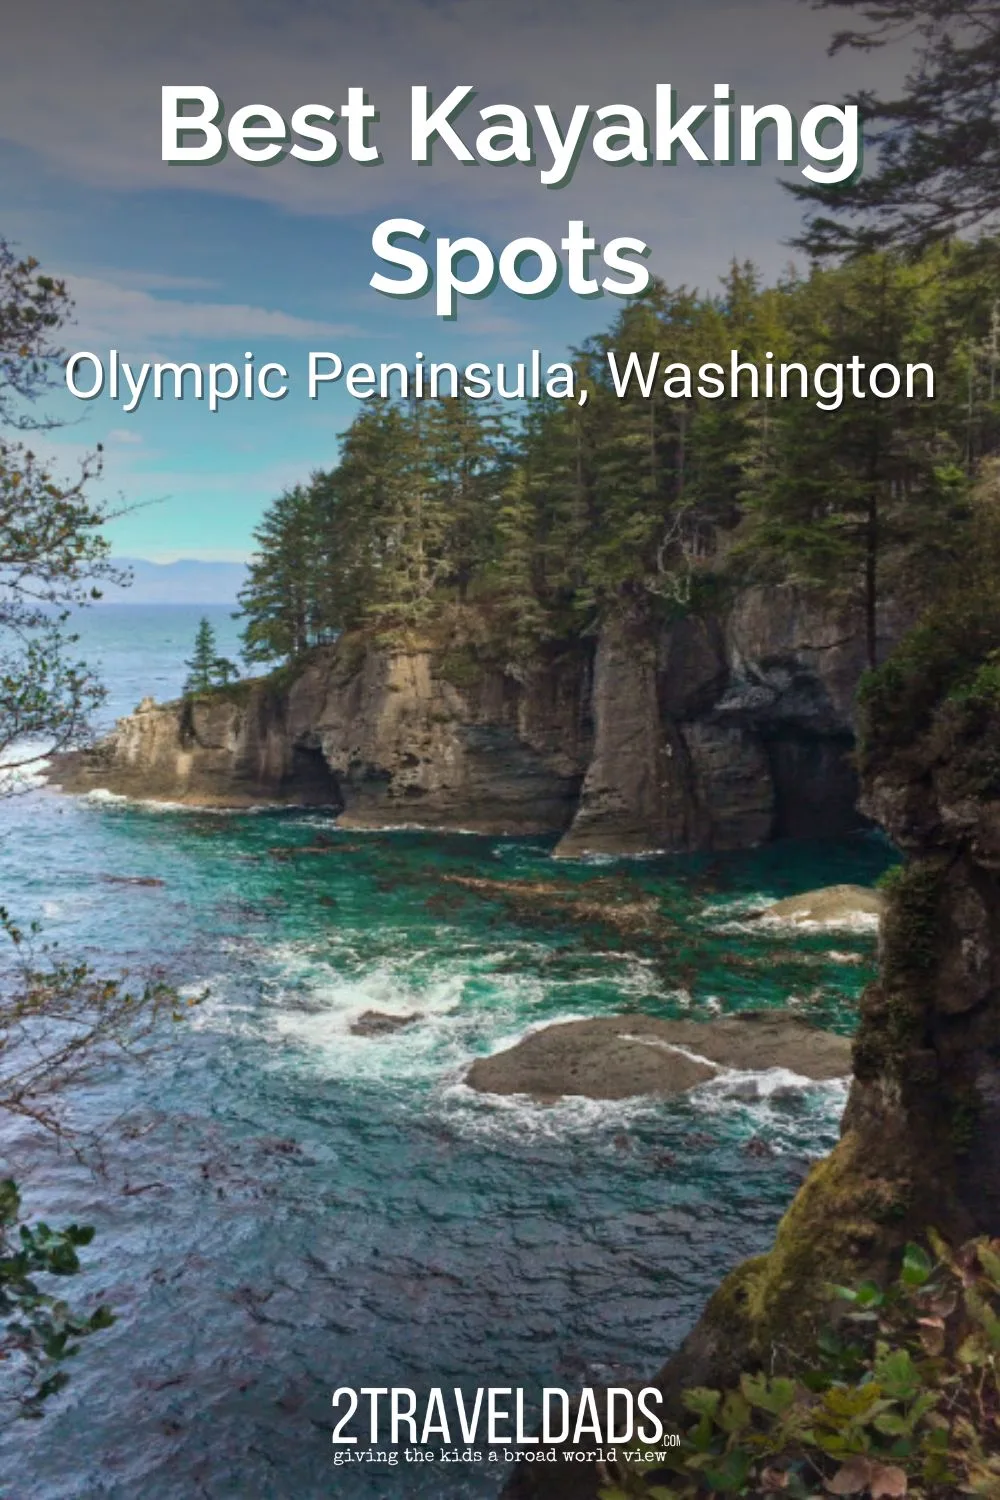 Kayaking on the Olympic Peninsula includes everything from snow-melt rivers to peaceful mountain lakes, from the Strait of Juan de Fuca, to the slow flowing tide of Hood Canal. This guide includes some of the best and most beautiful places to paddle on the Olympic Peninsula.